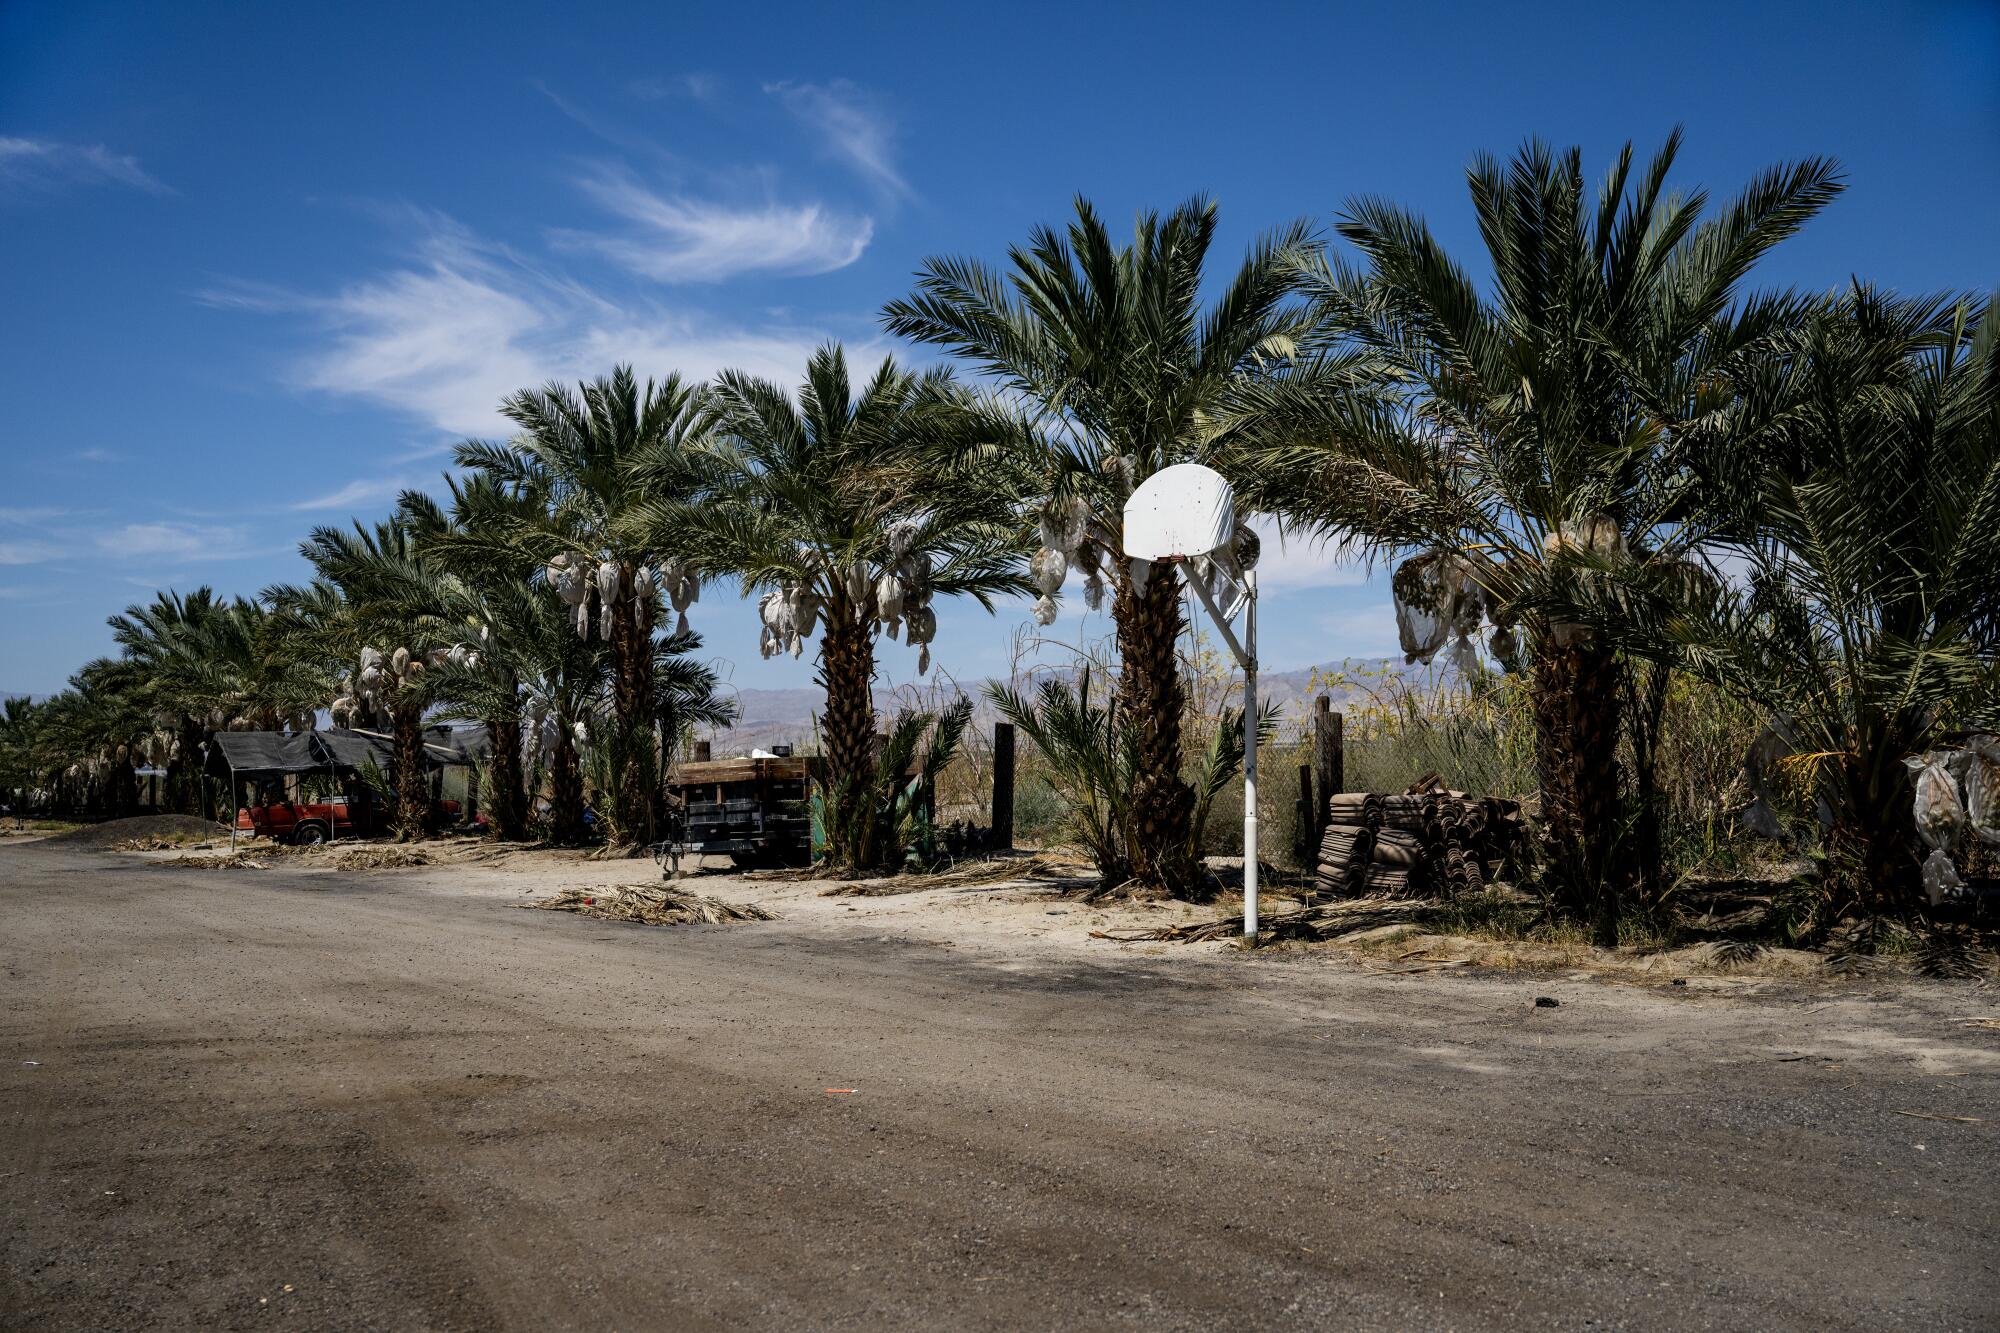 Date palm trees and a broken basketball hoop line the dirt road in front of a trailer park